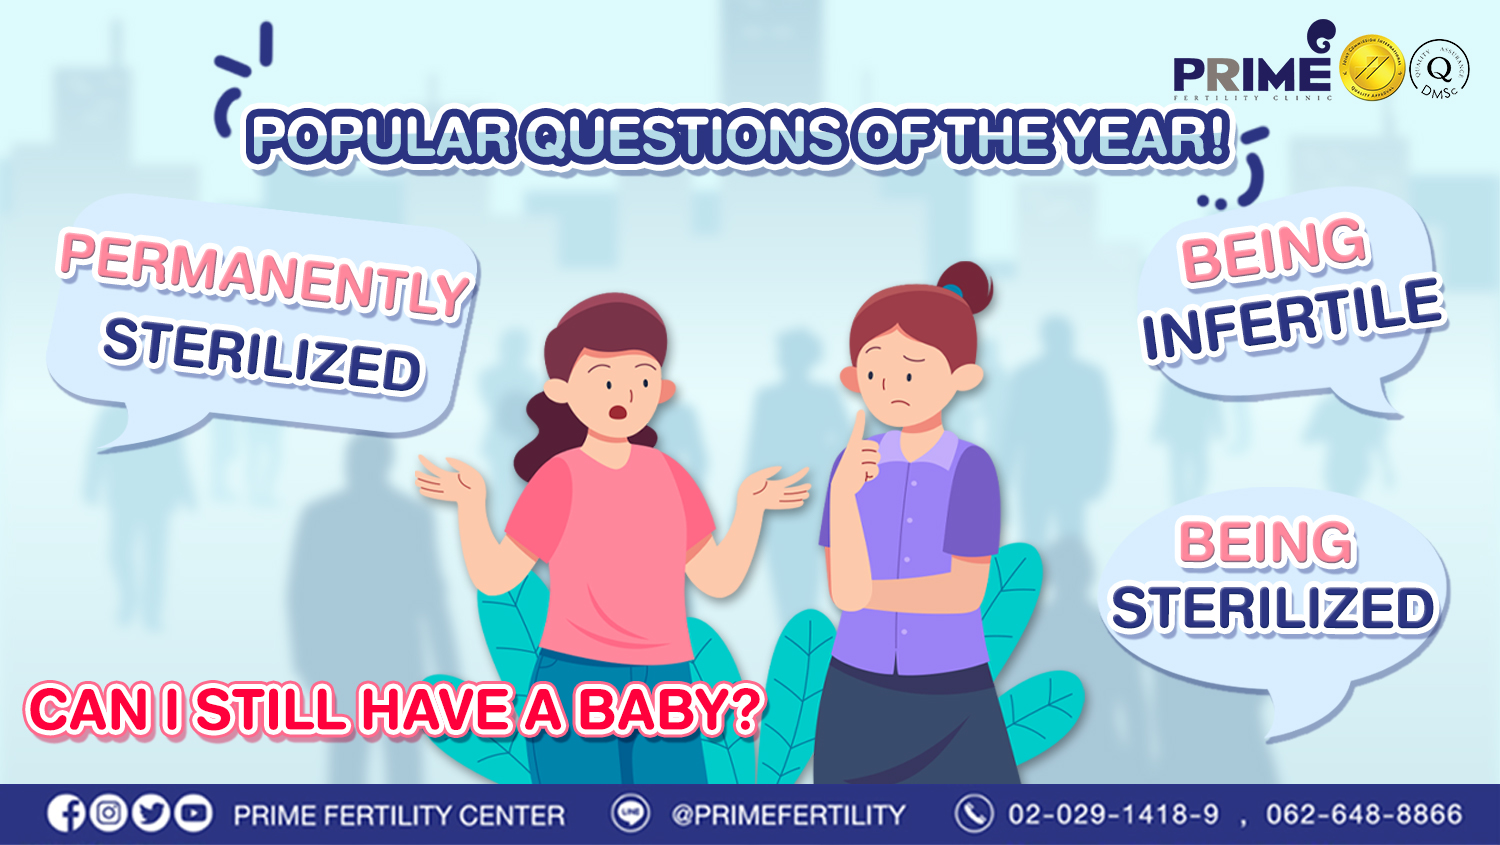 After being sterilized, permanently sterilized, being infertile, can I still have a baby?